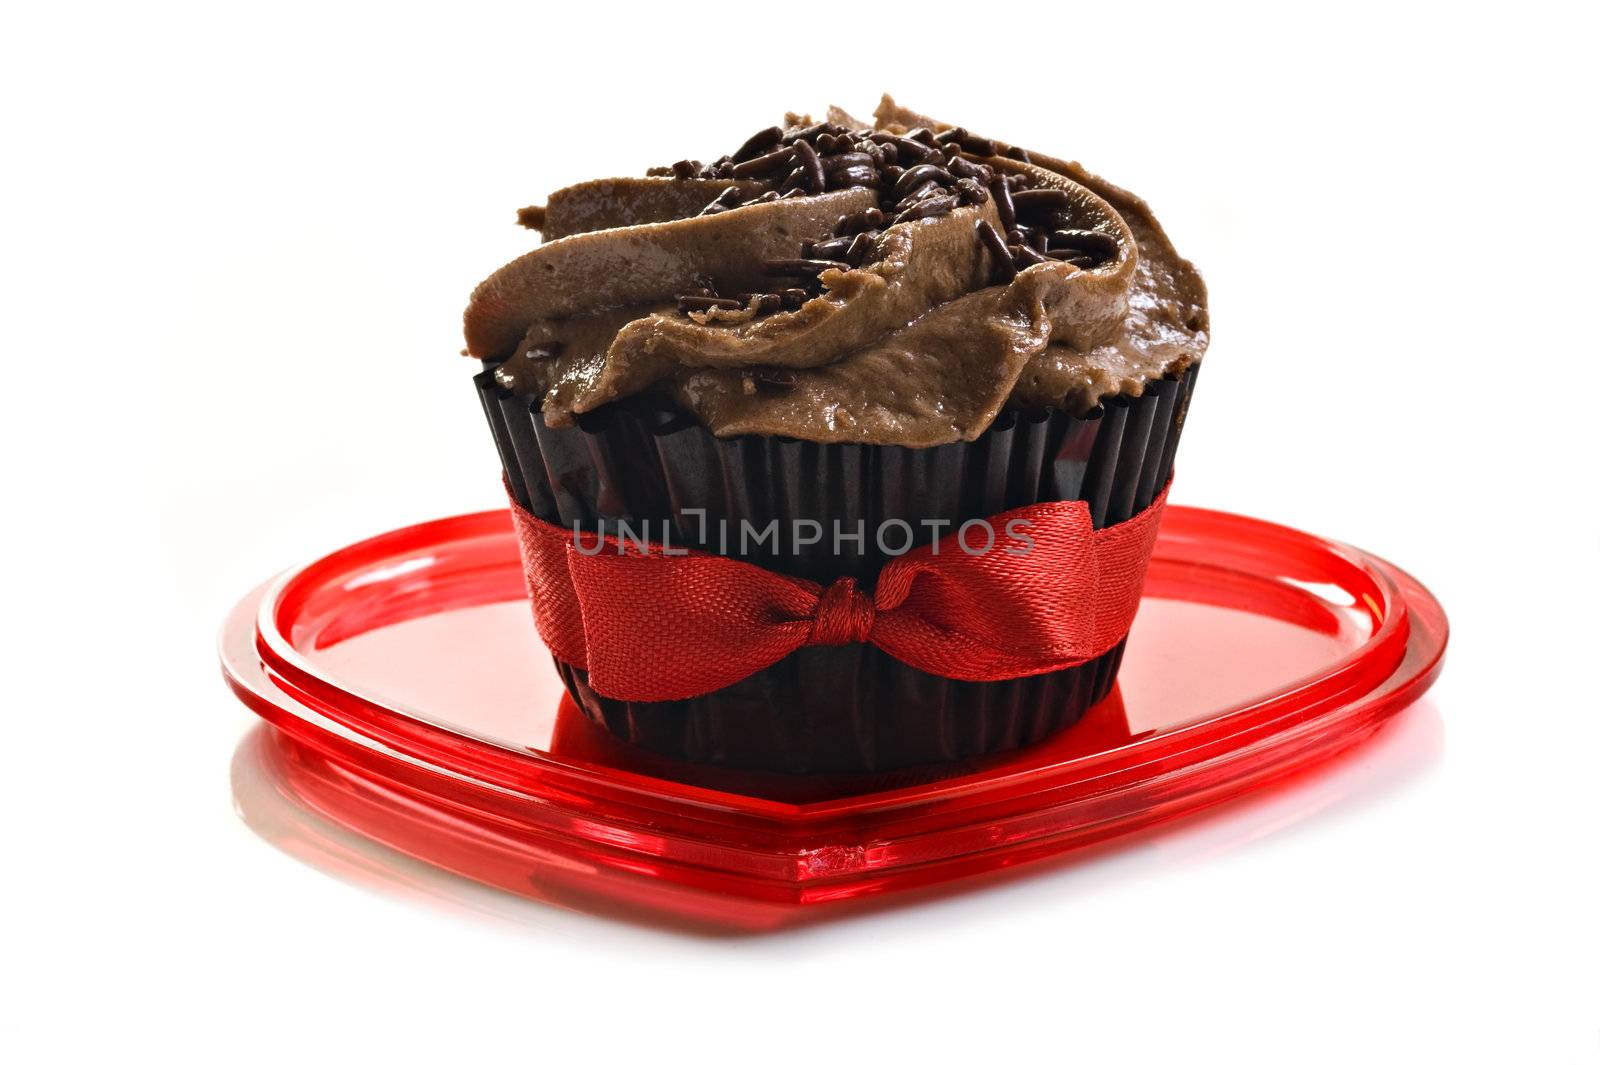 Chocolate cupcake with red bow on a heart shaped plate